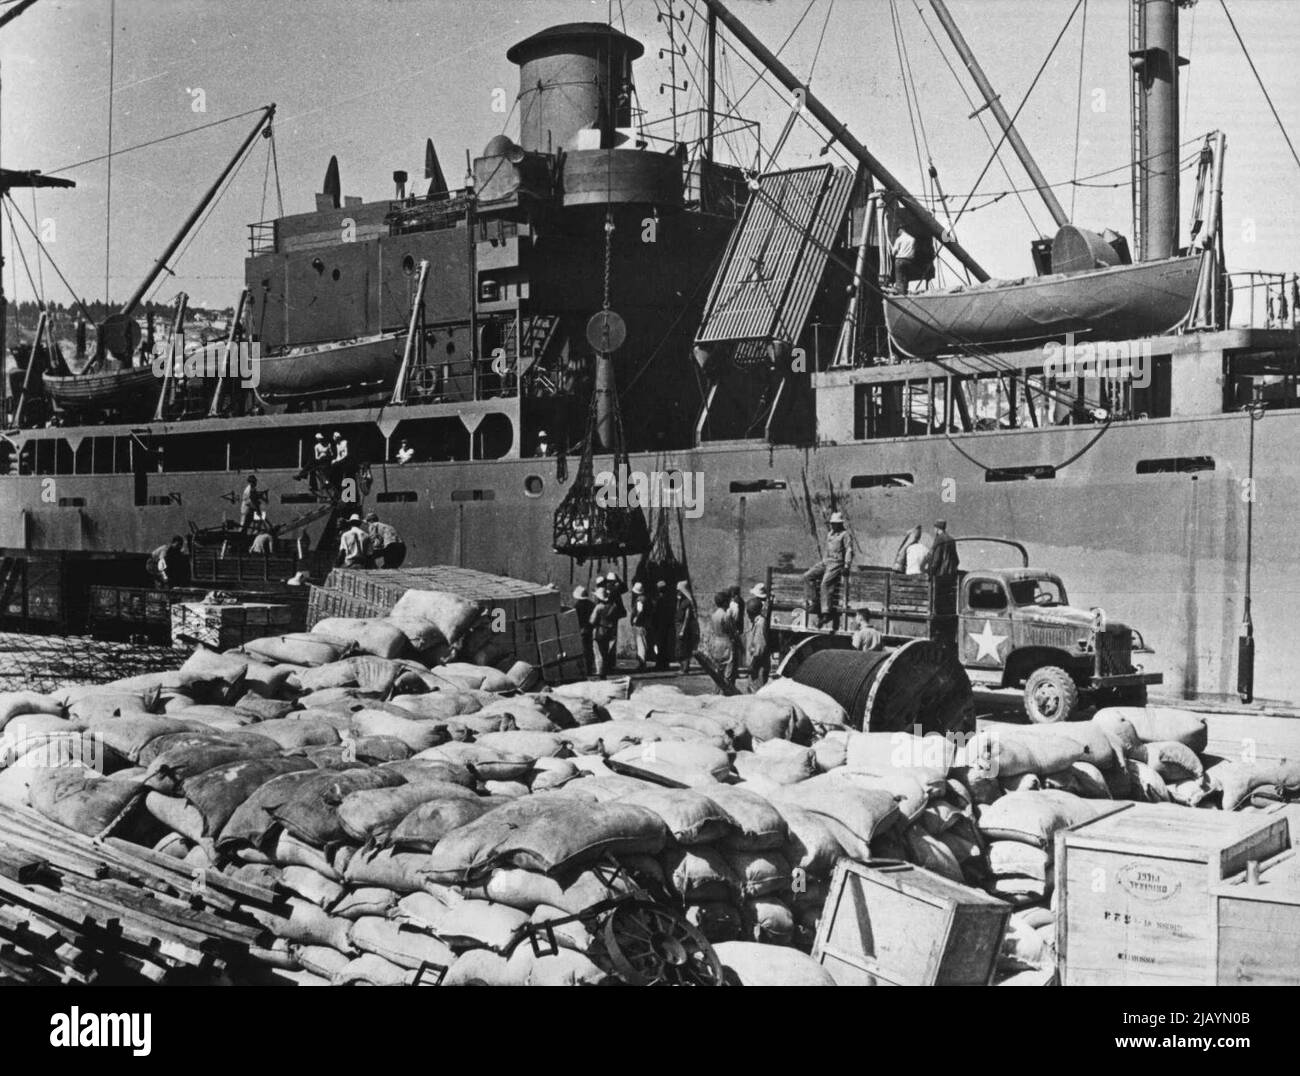 Allied Lend-Lease Supplies Arrive In North Africa -- U.S. Army trucks are loaded with lend-lease supplies on a North African dock piled high with machinery, foodstuffs and other materials which have just arrived from the U.S. on the ship in the background. The cargo was sent to Africa as part of the Allied rehabilitation program for liberated countries. November 06, 1943. (Photo by U.S. Office Of War Information Picture). Stock Photo